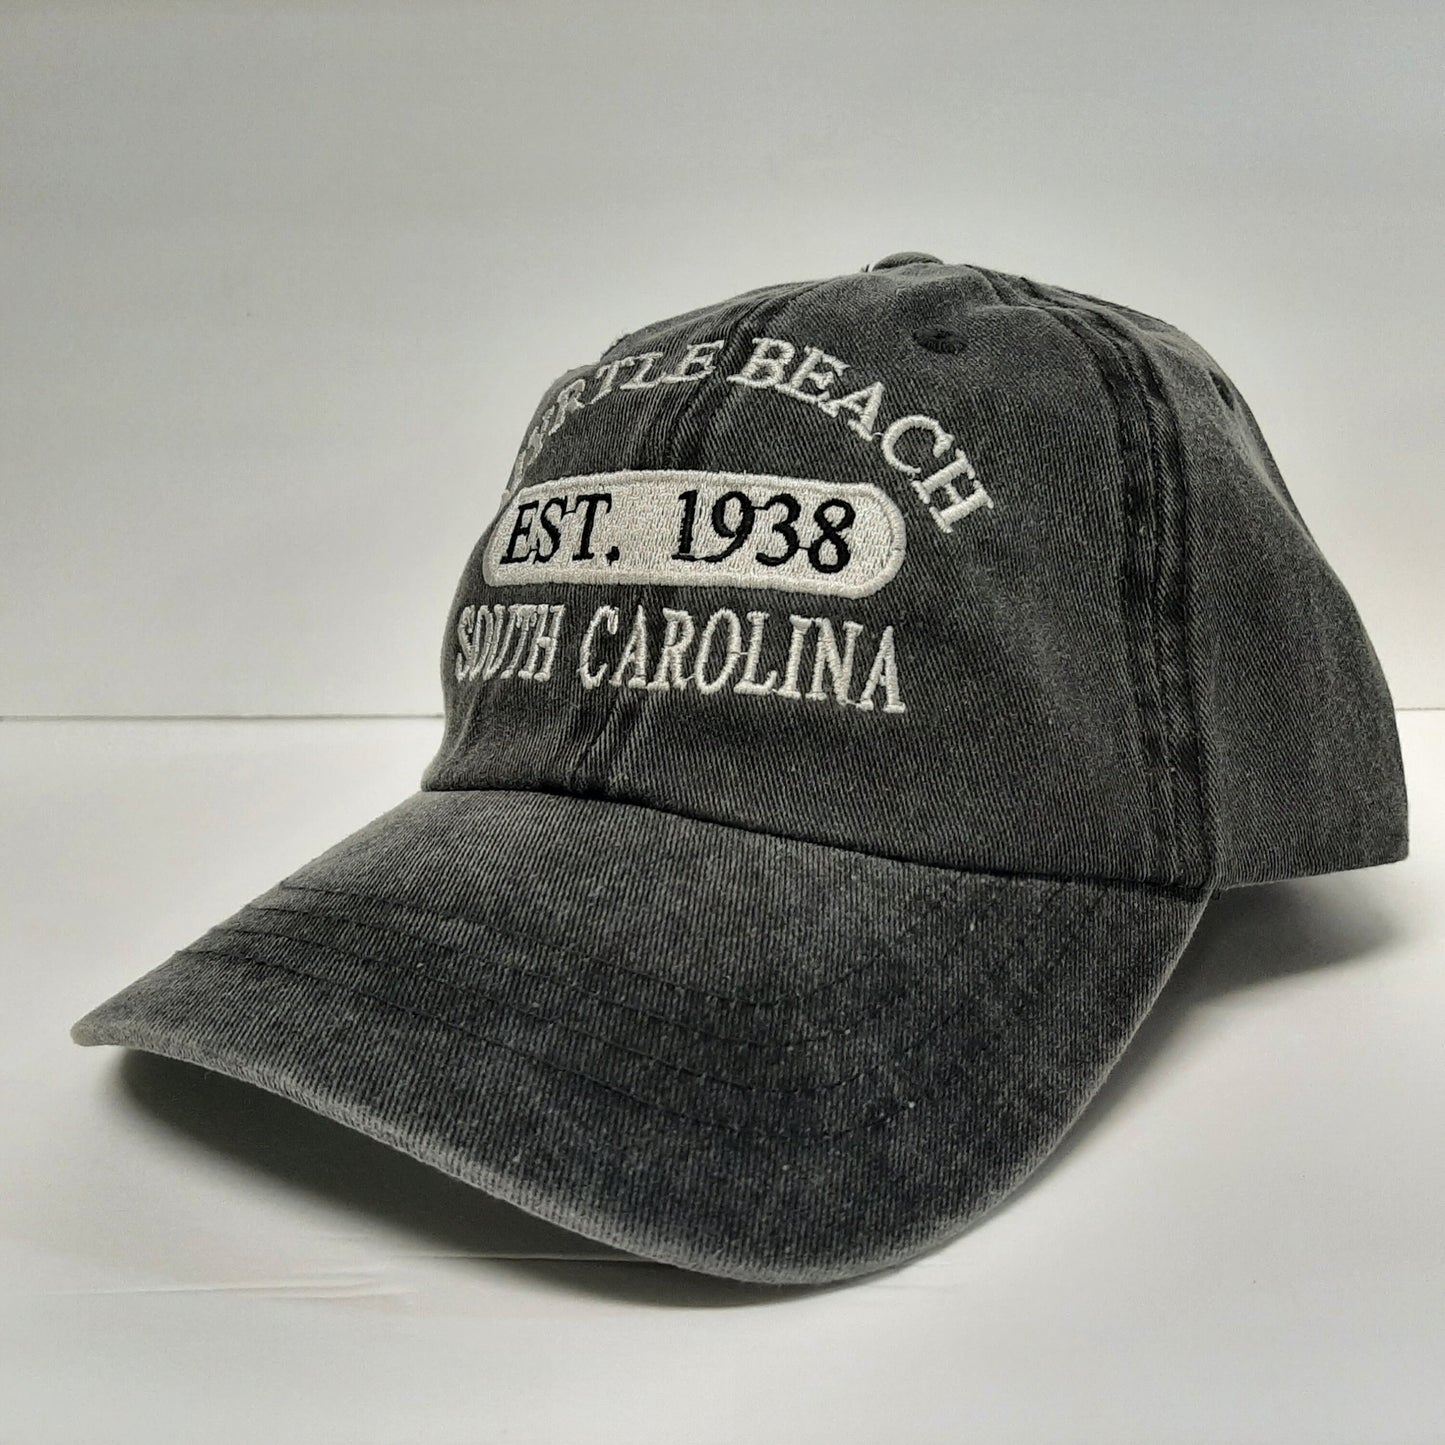 Myrtle Beach South Carolina Relaxed Dad Hat Cap Gray Washed Cotton Embroidered Strapback